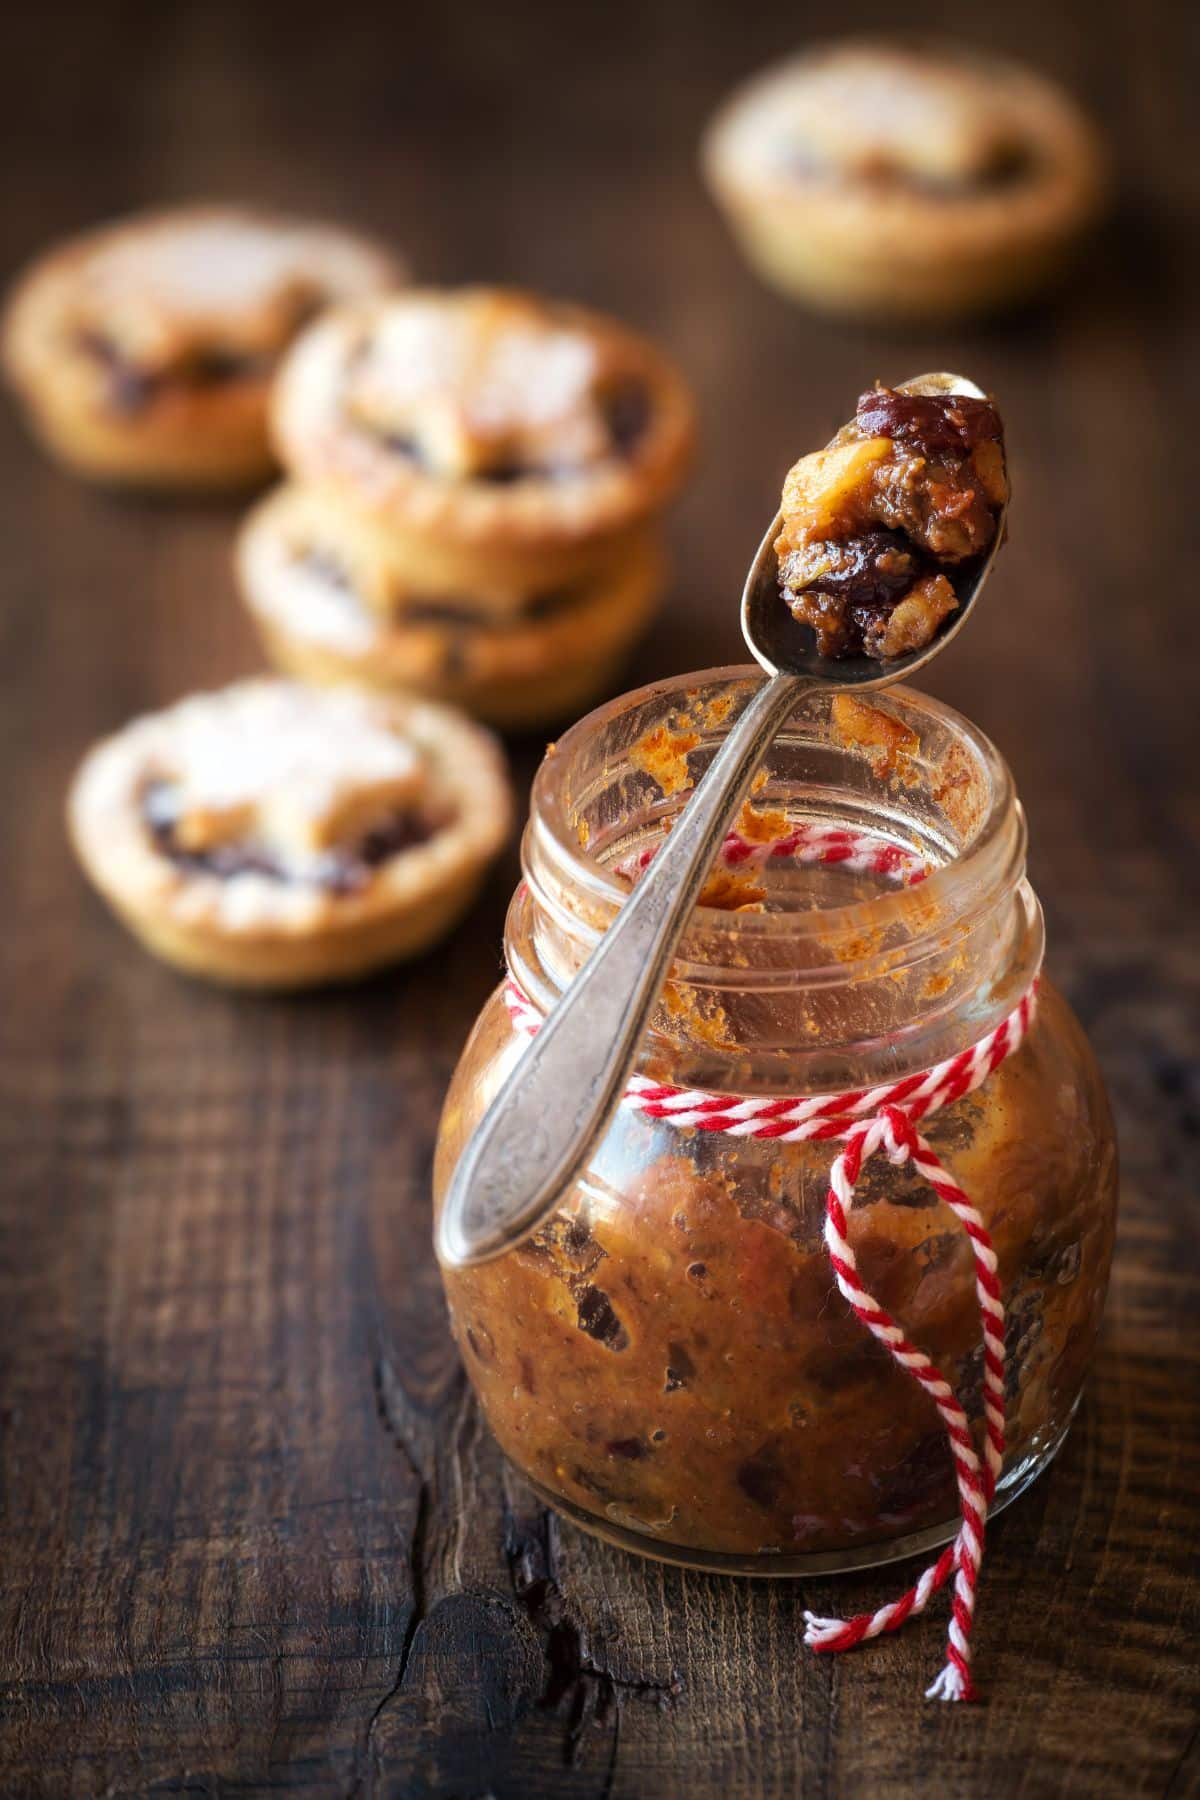 An open jar of mincemeat and a spoon, with mince pies behind